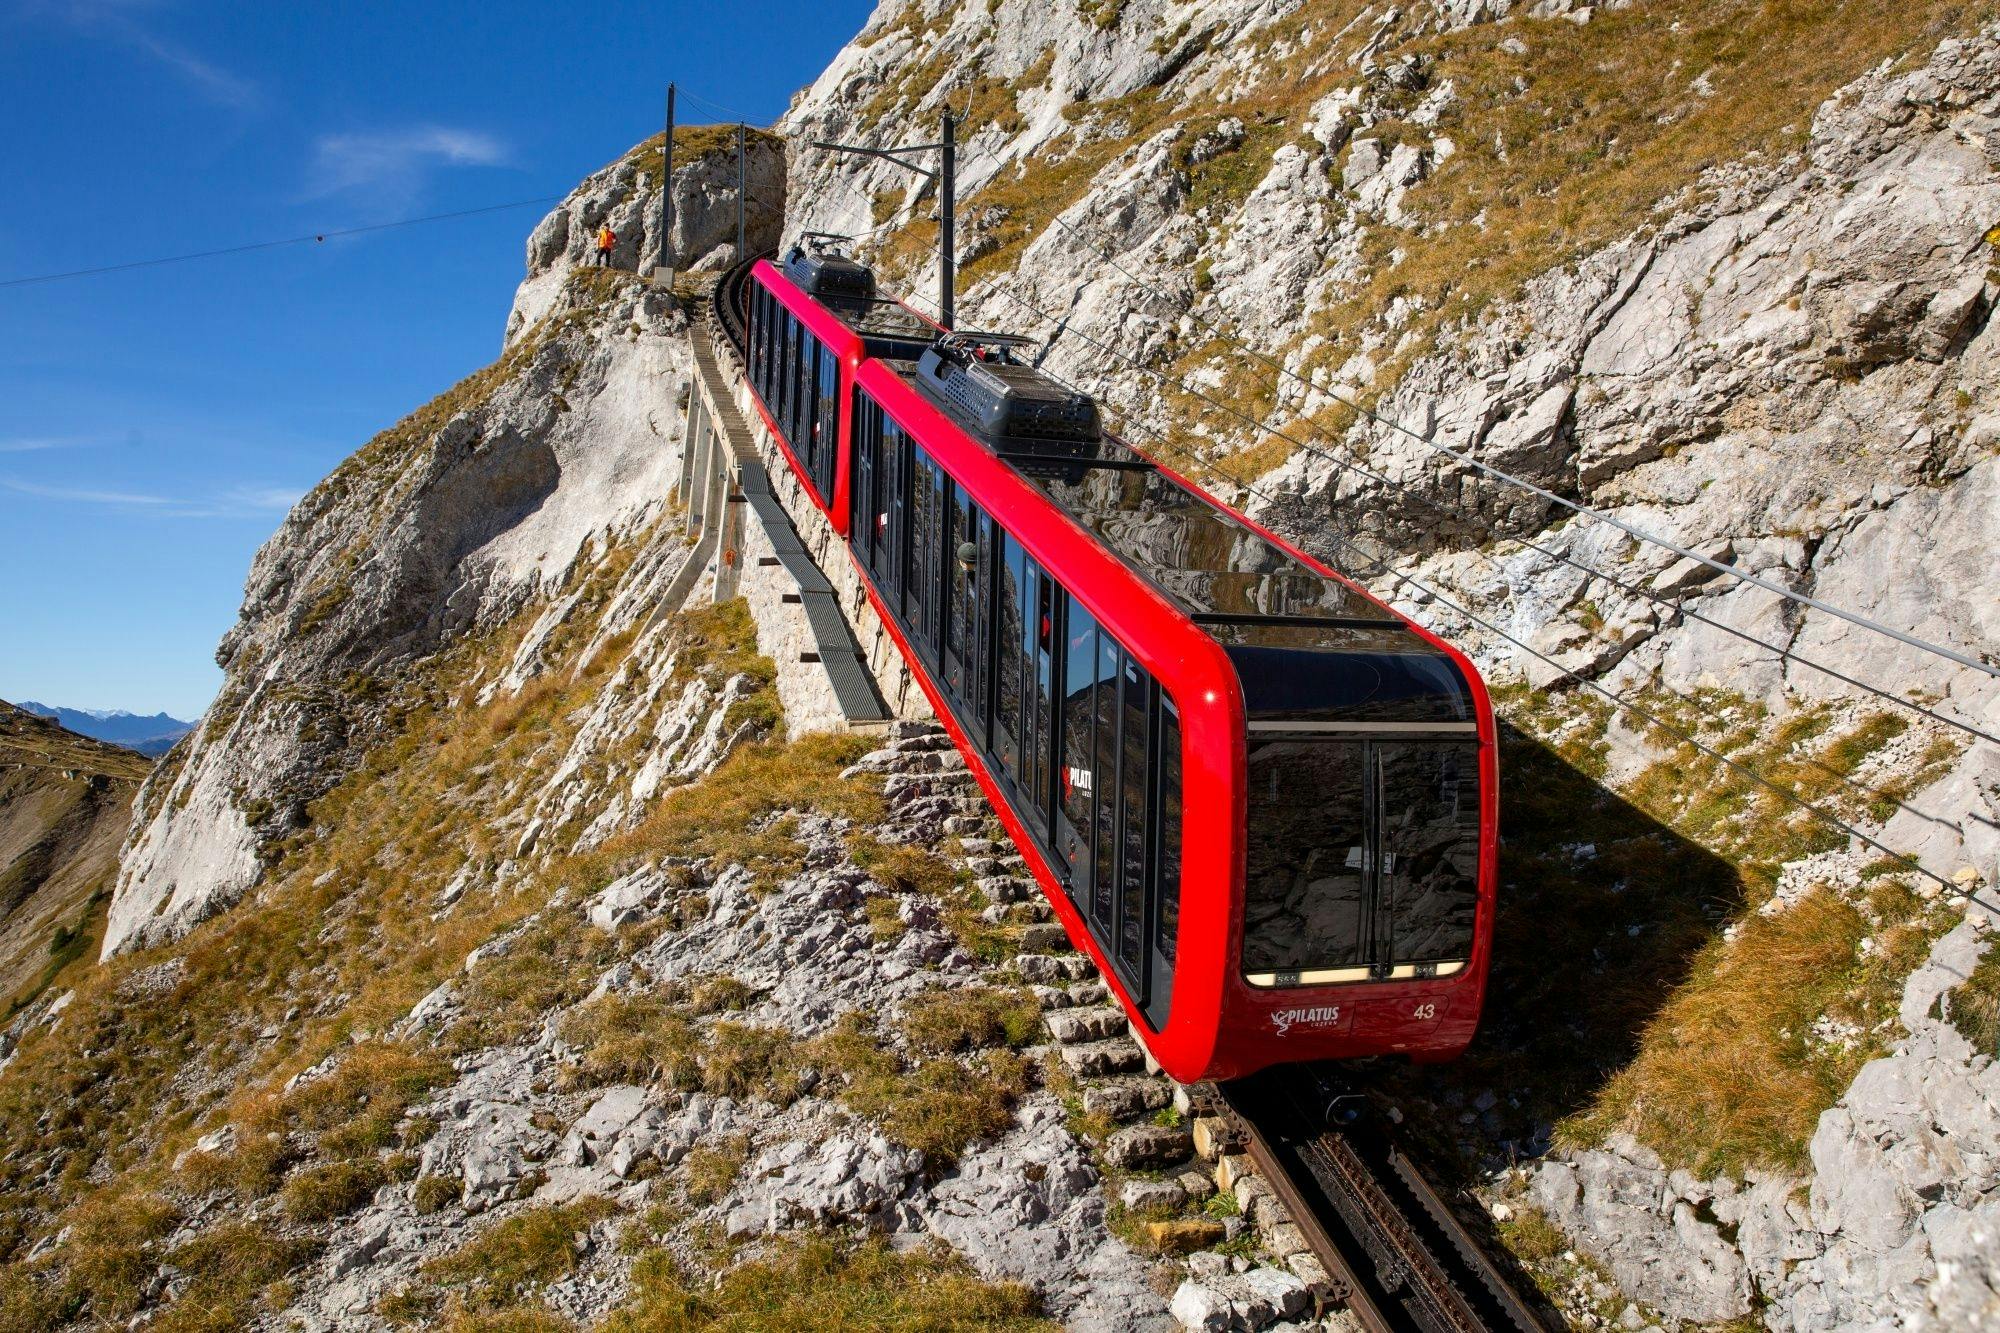 Mount Pilatus Train and Cable Car Ticket from Alpnachstad or Kriens